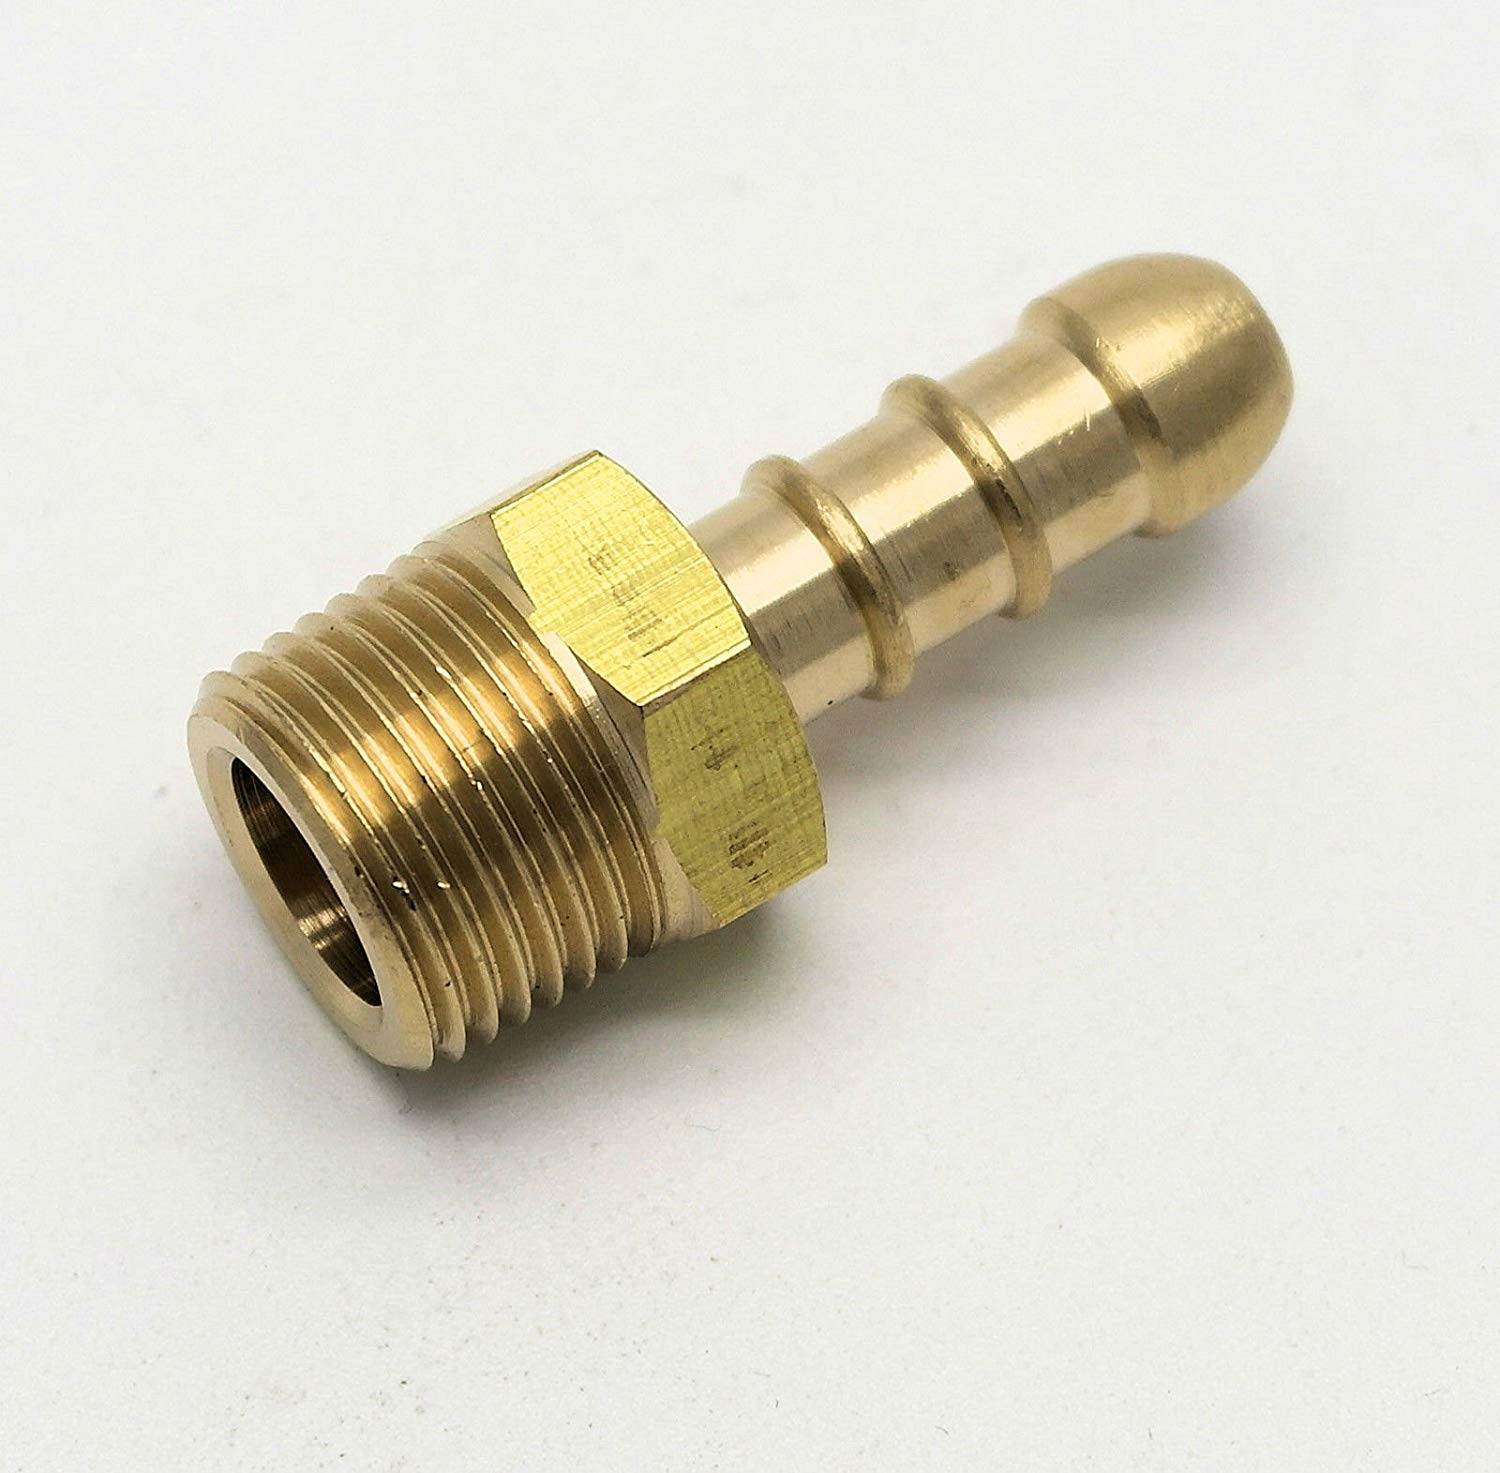 3/8" BSP female Fulham nozzle connector to LPG 8mm id rubber hose. 